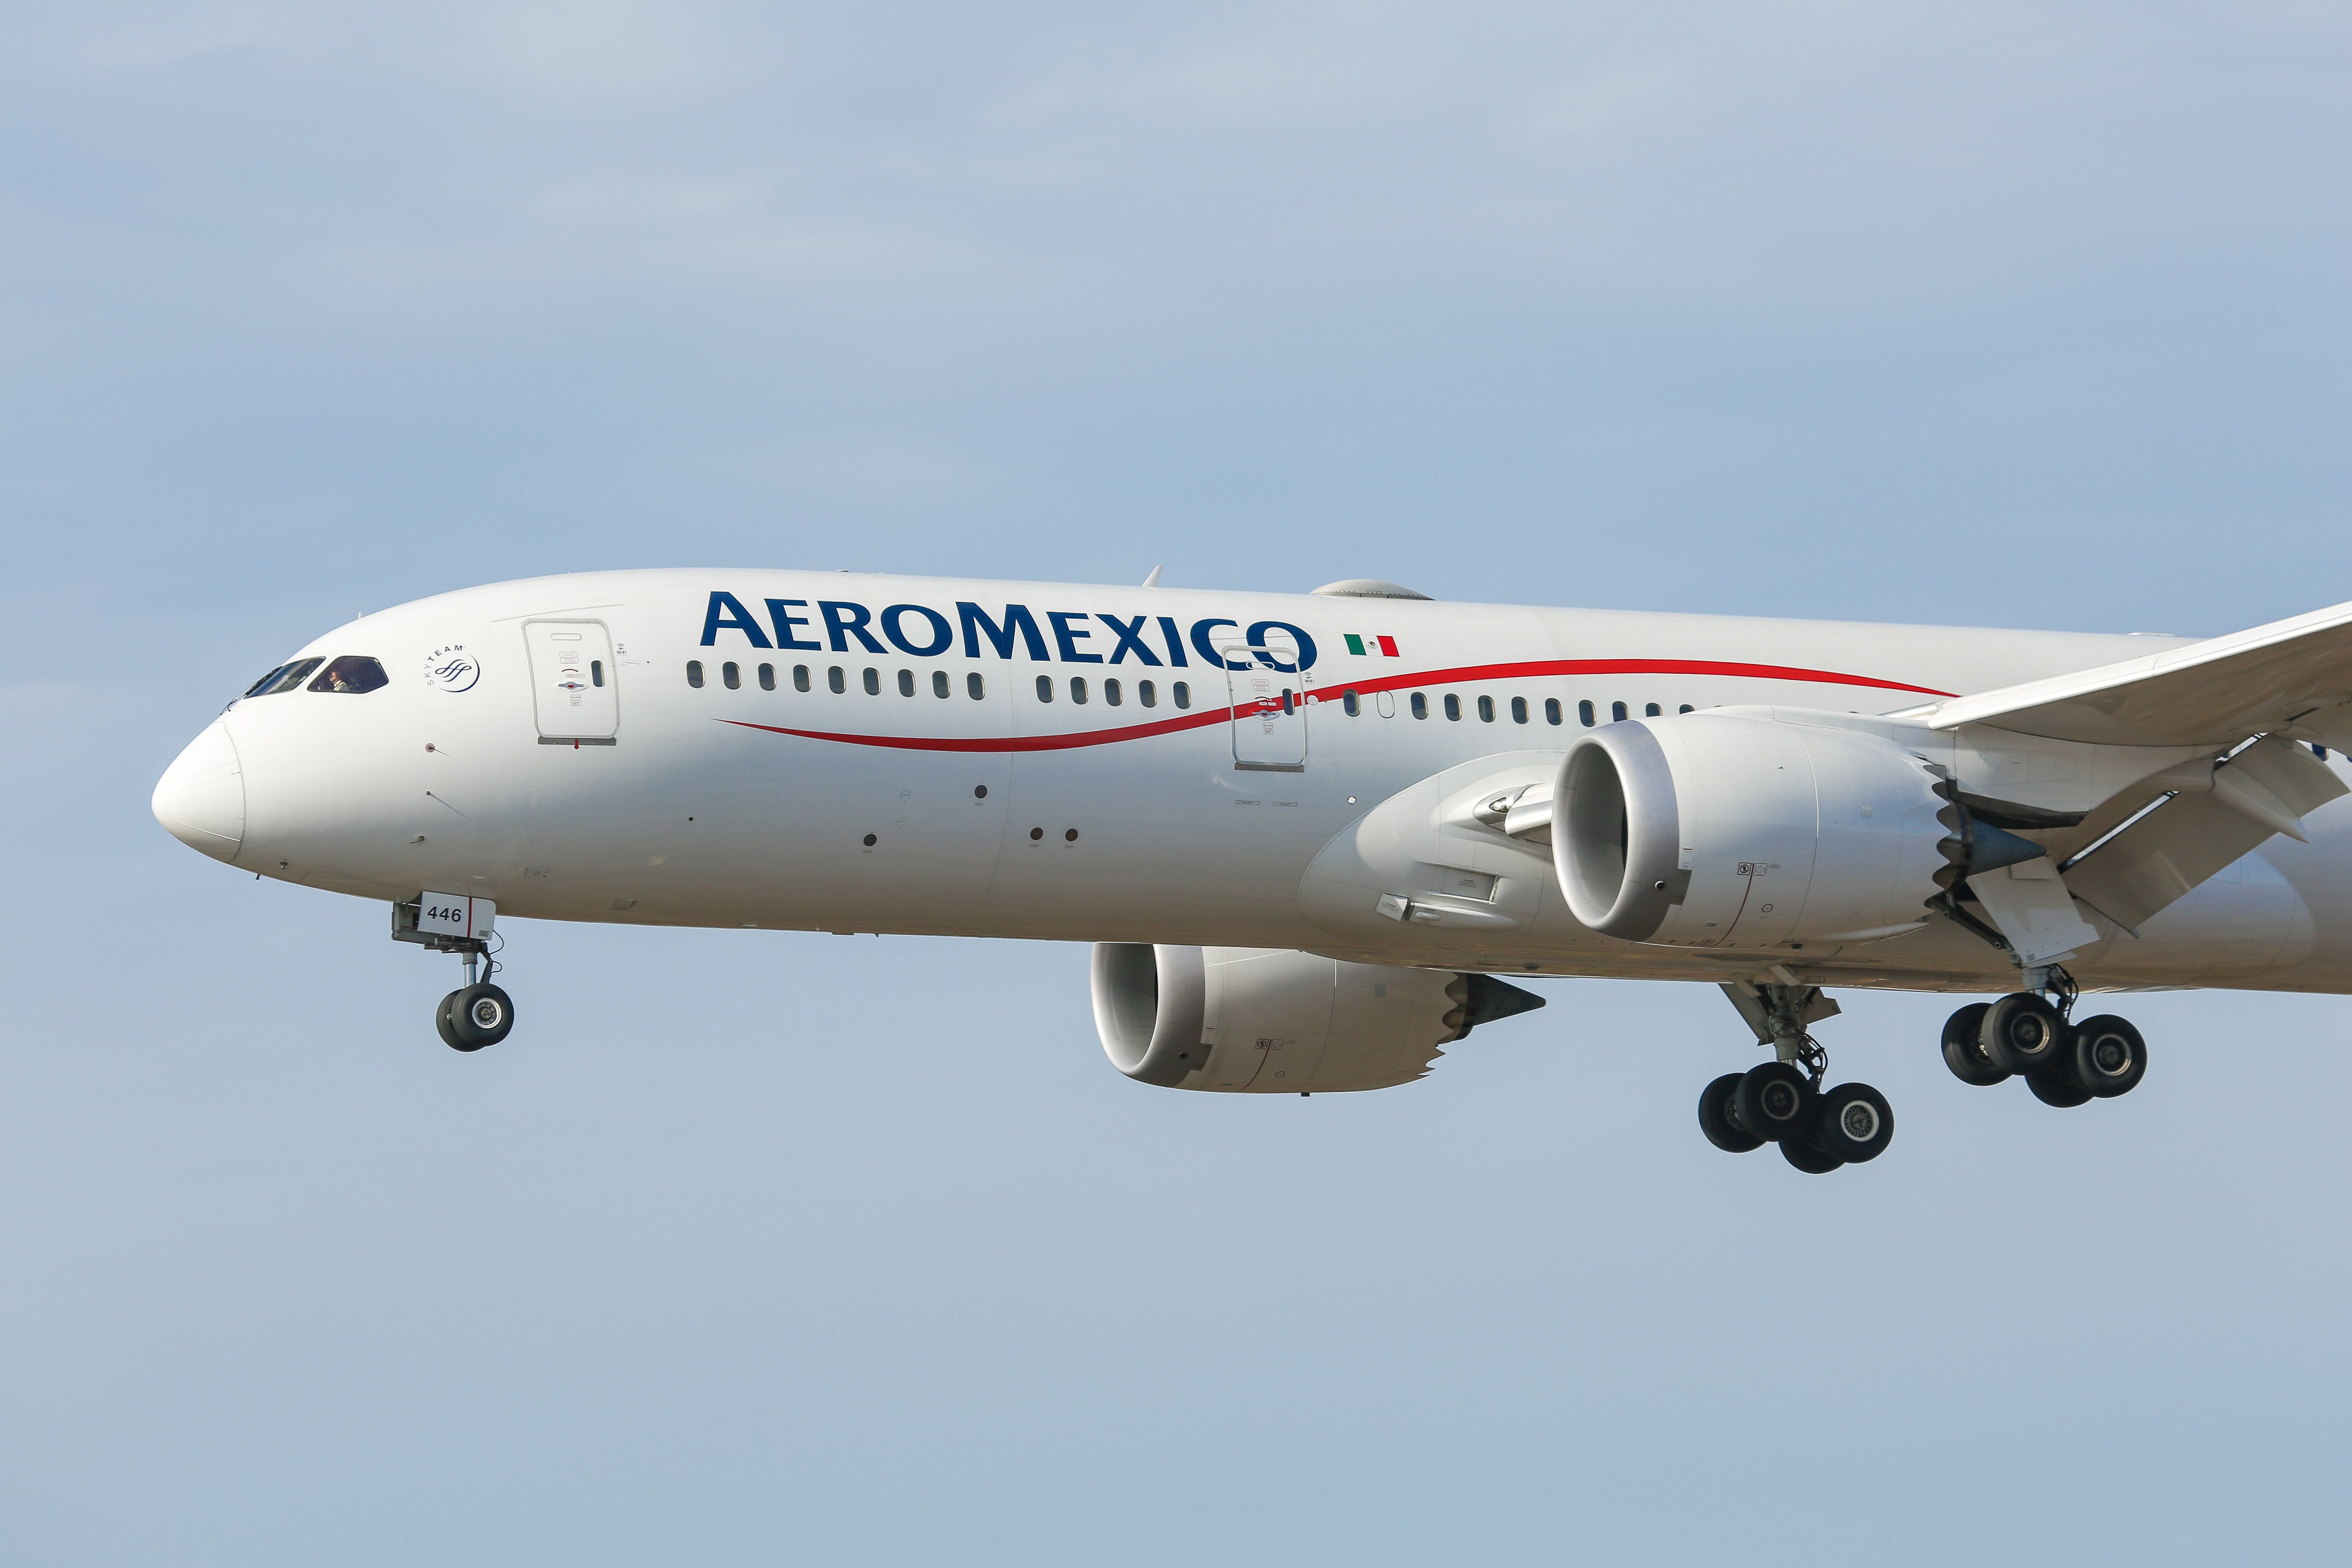 An Aeromexico Boeing 787 Dreamliner.